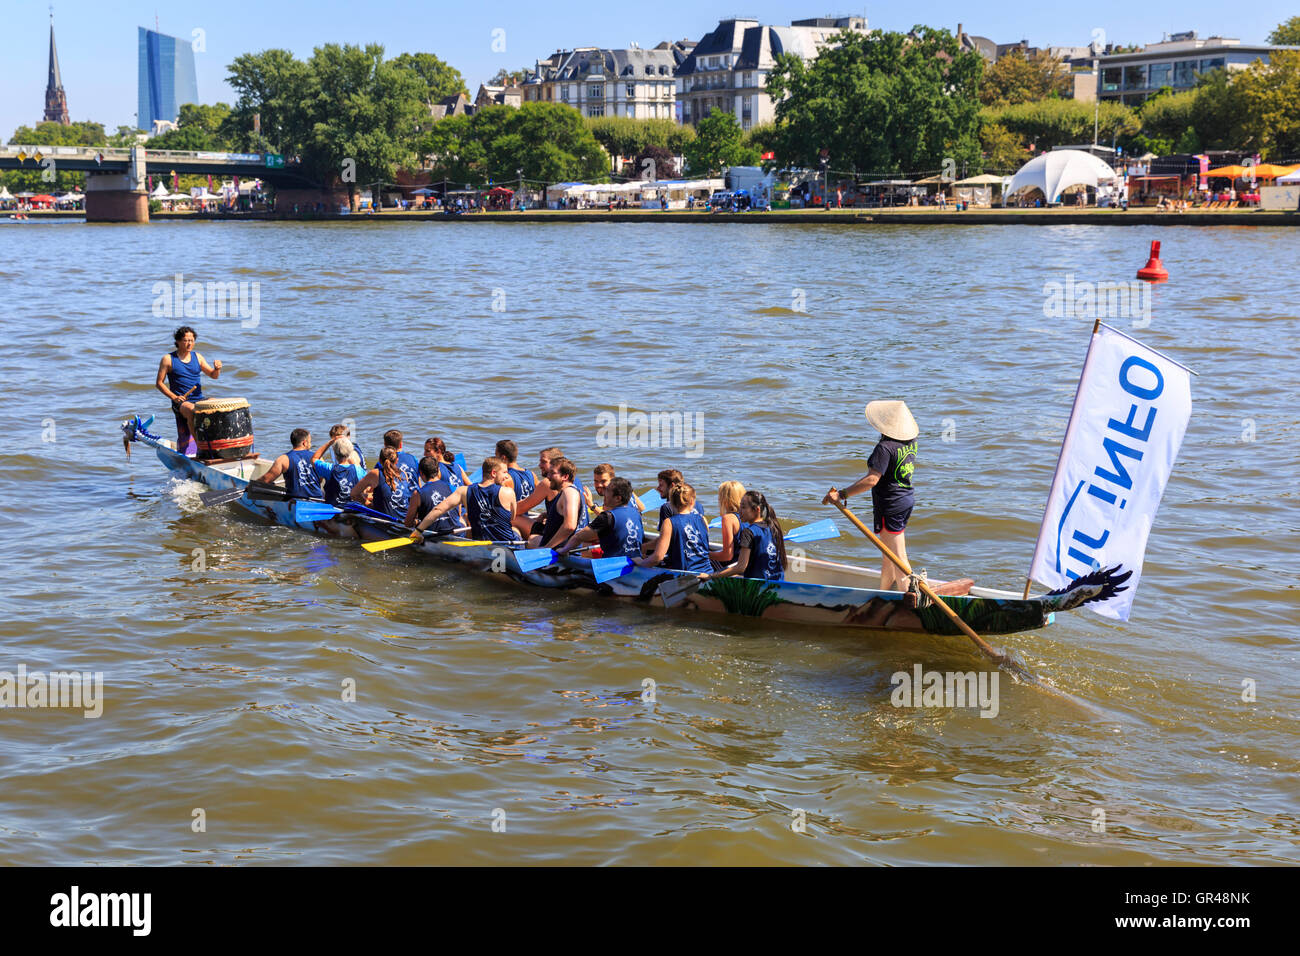 Dragon boat race on the River Main, during the Museumsuferfest (Museum Embankment) Festival in Frankfurt am Main, Germany Stock Photo